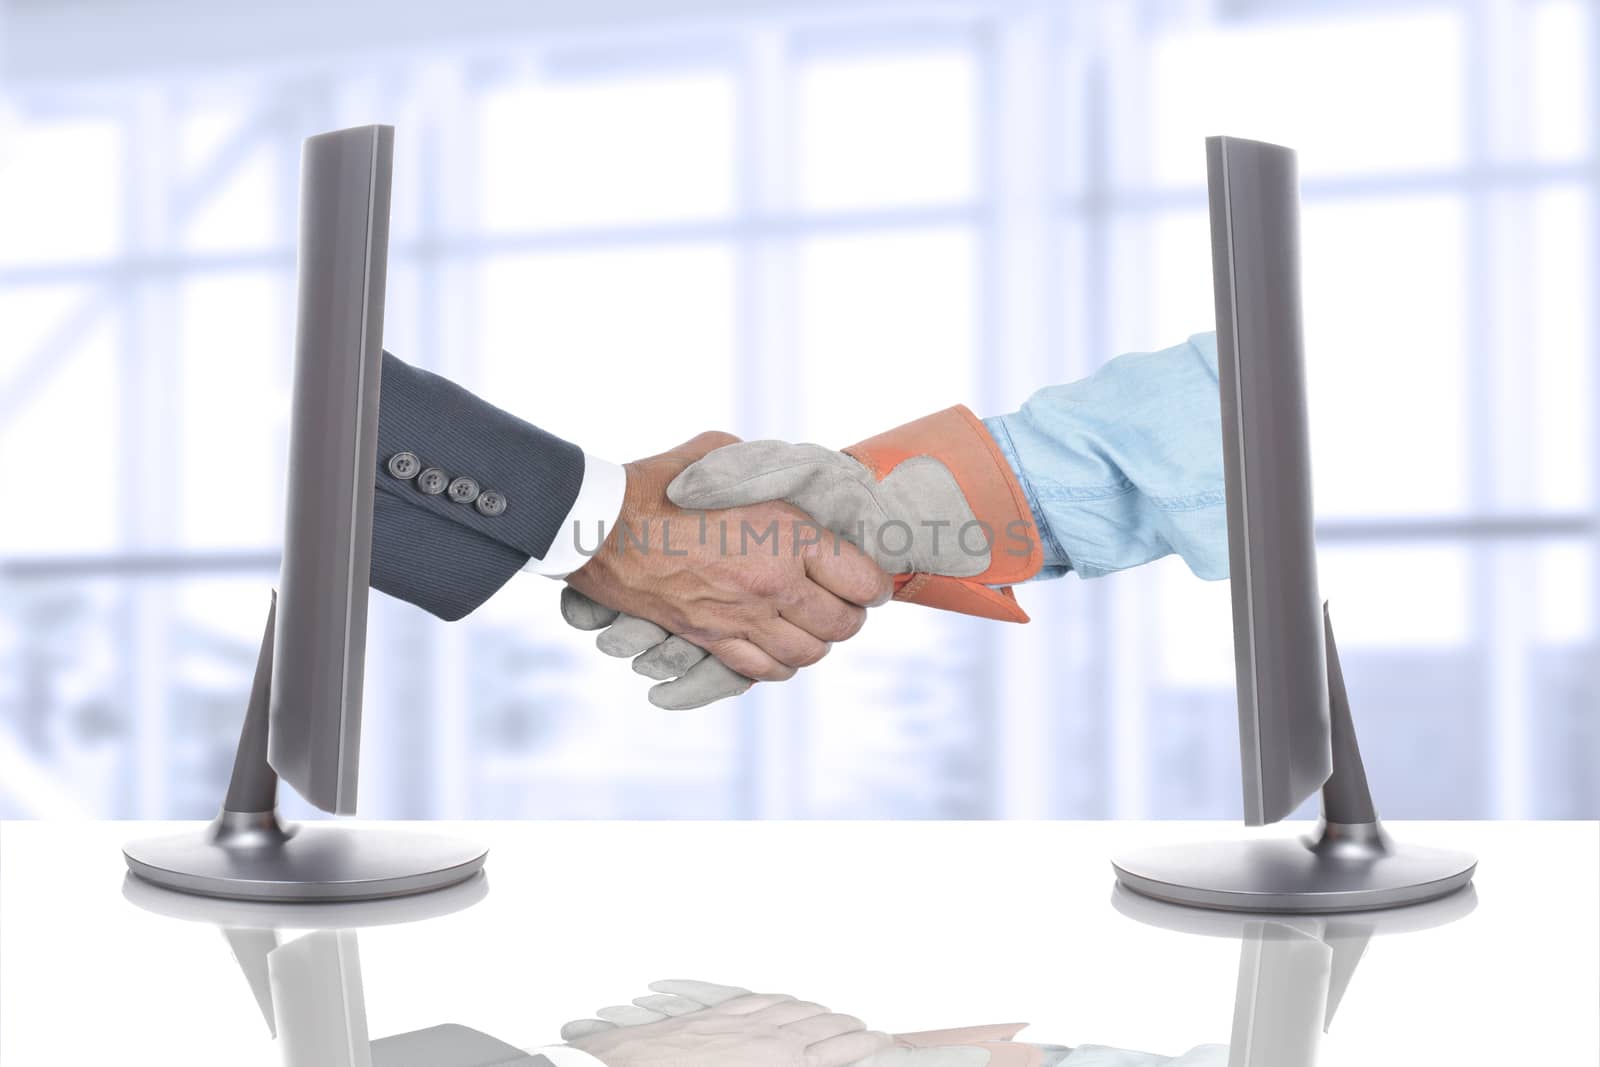 Handshake Over Desk in Business Office. Both hands are coming out of computer screens. 